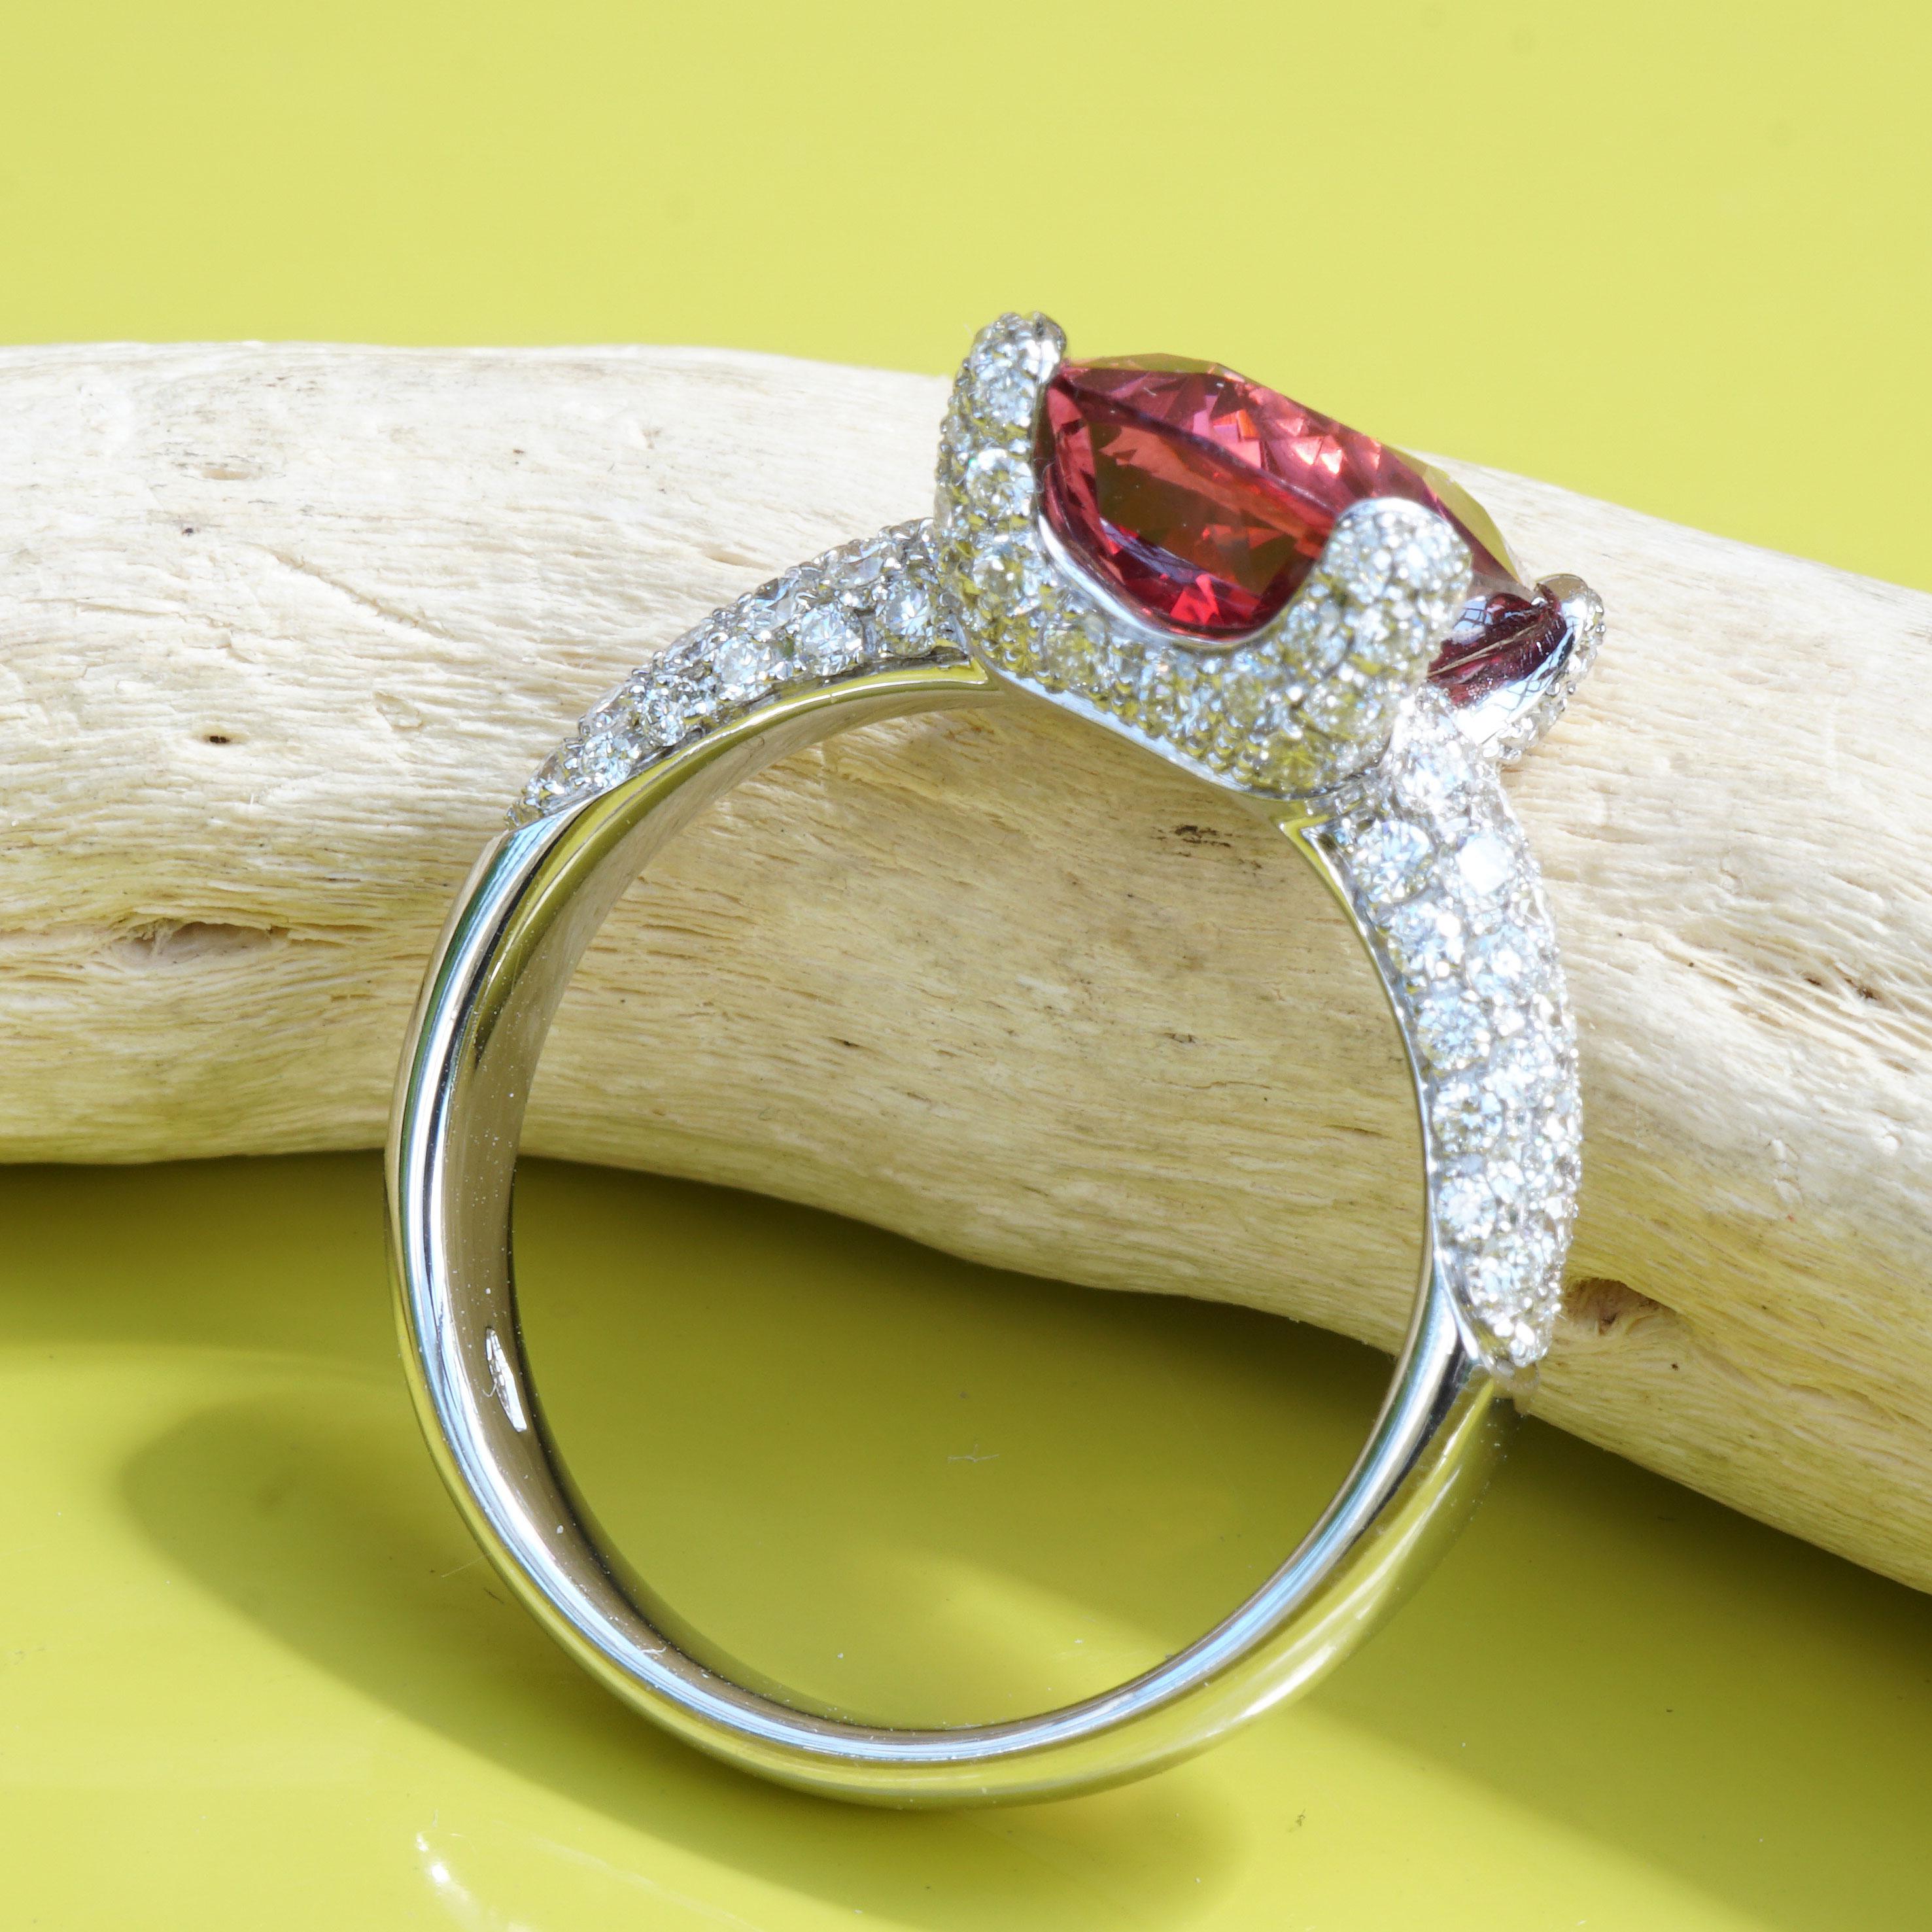 Brilliant Cut 3.65 ct AAA+ Red Spinel Brilliant Ring  White Gold Mine Badachshan Afghanistan 